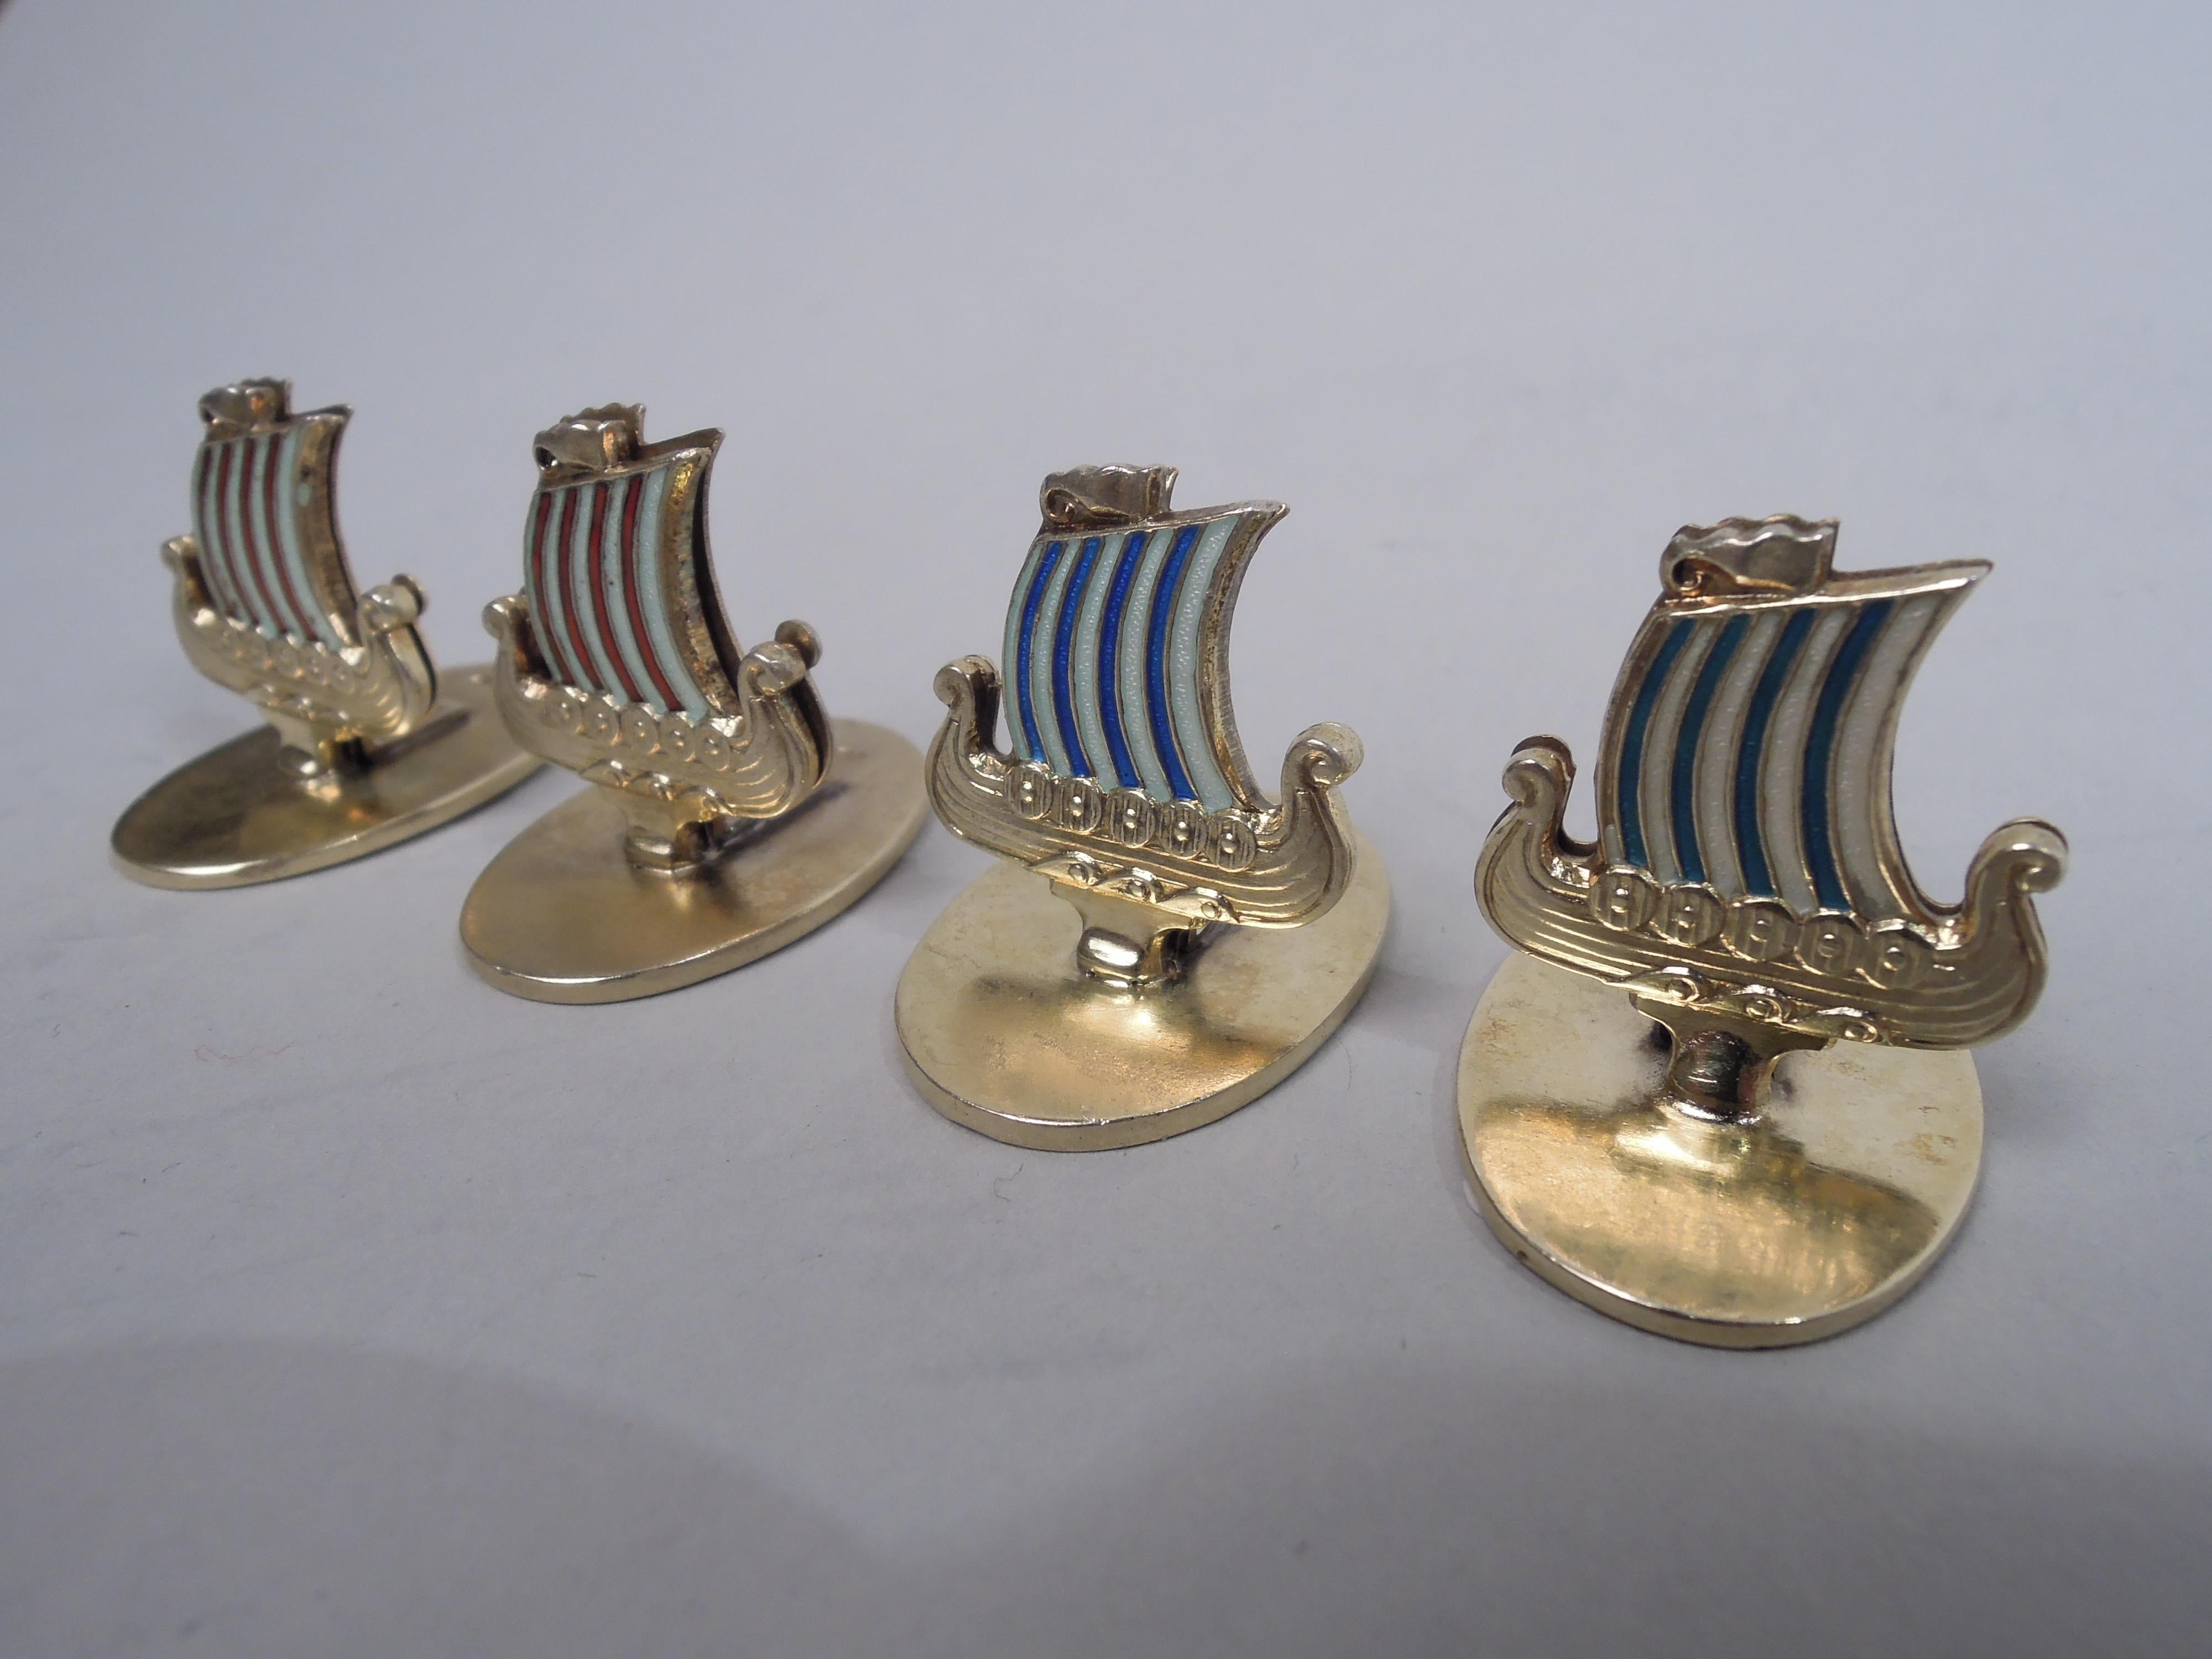 Set of 4 gilt and enameled sterling silver place card holders. Made by David Andersen in Norway, ca 1920. Each: Clip in form of Viking boat with scrolled posts and warrior shield rim. Stealthy movement suggested by billowing sails and lapping water.